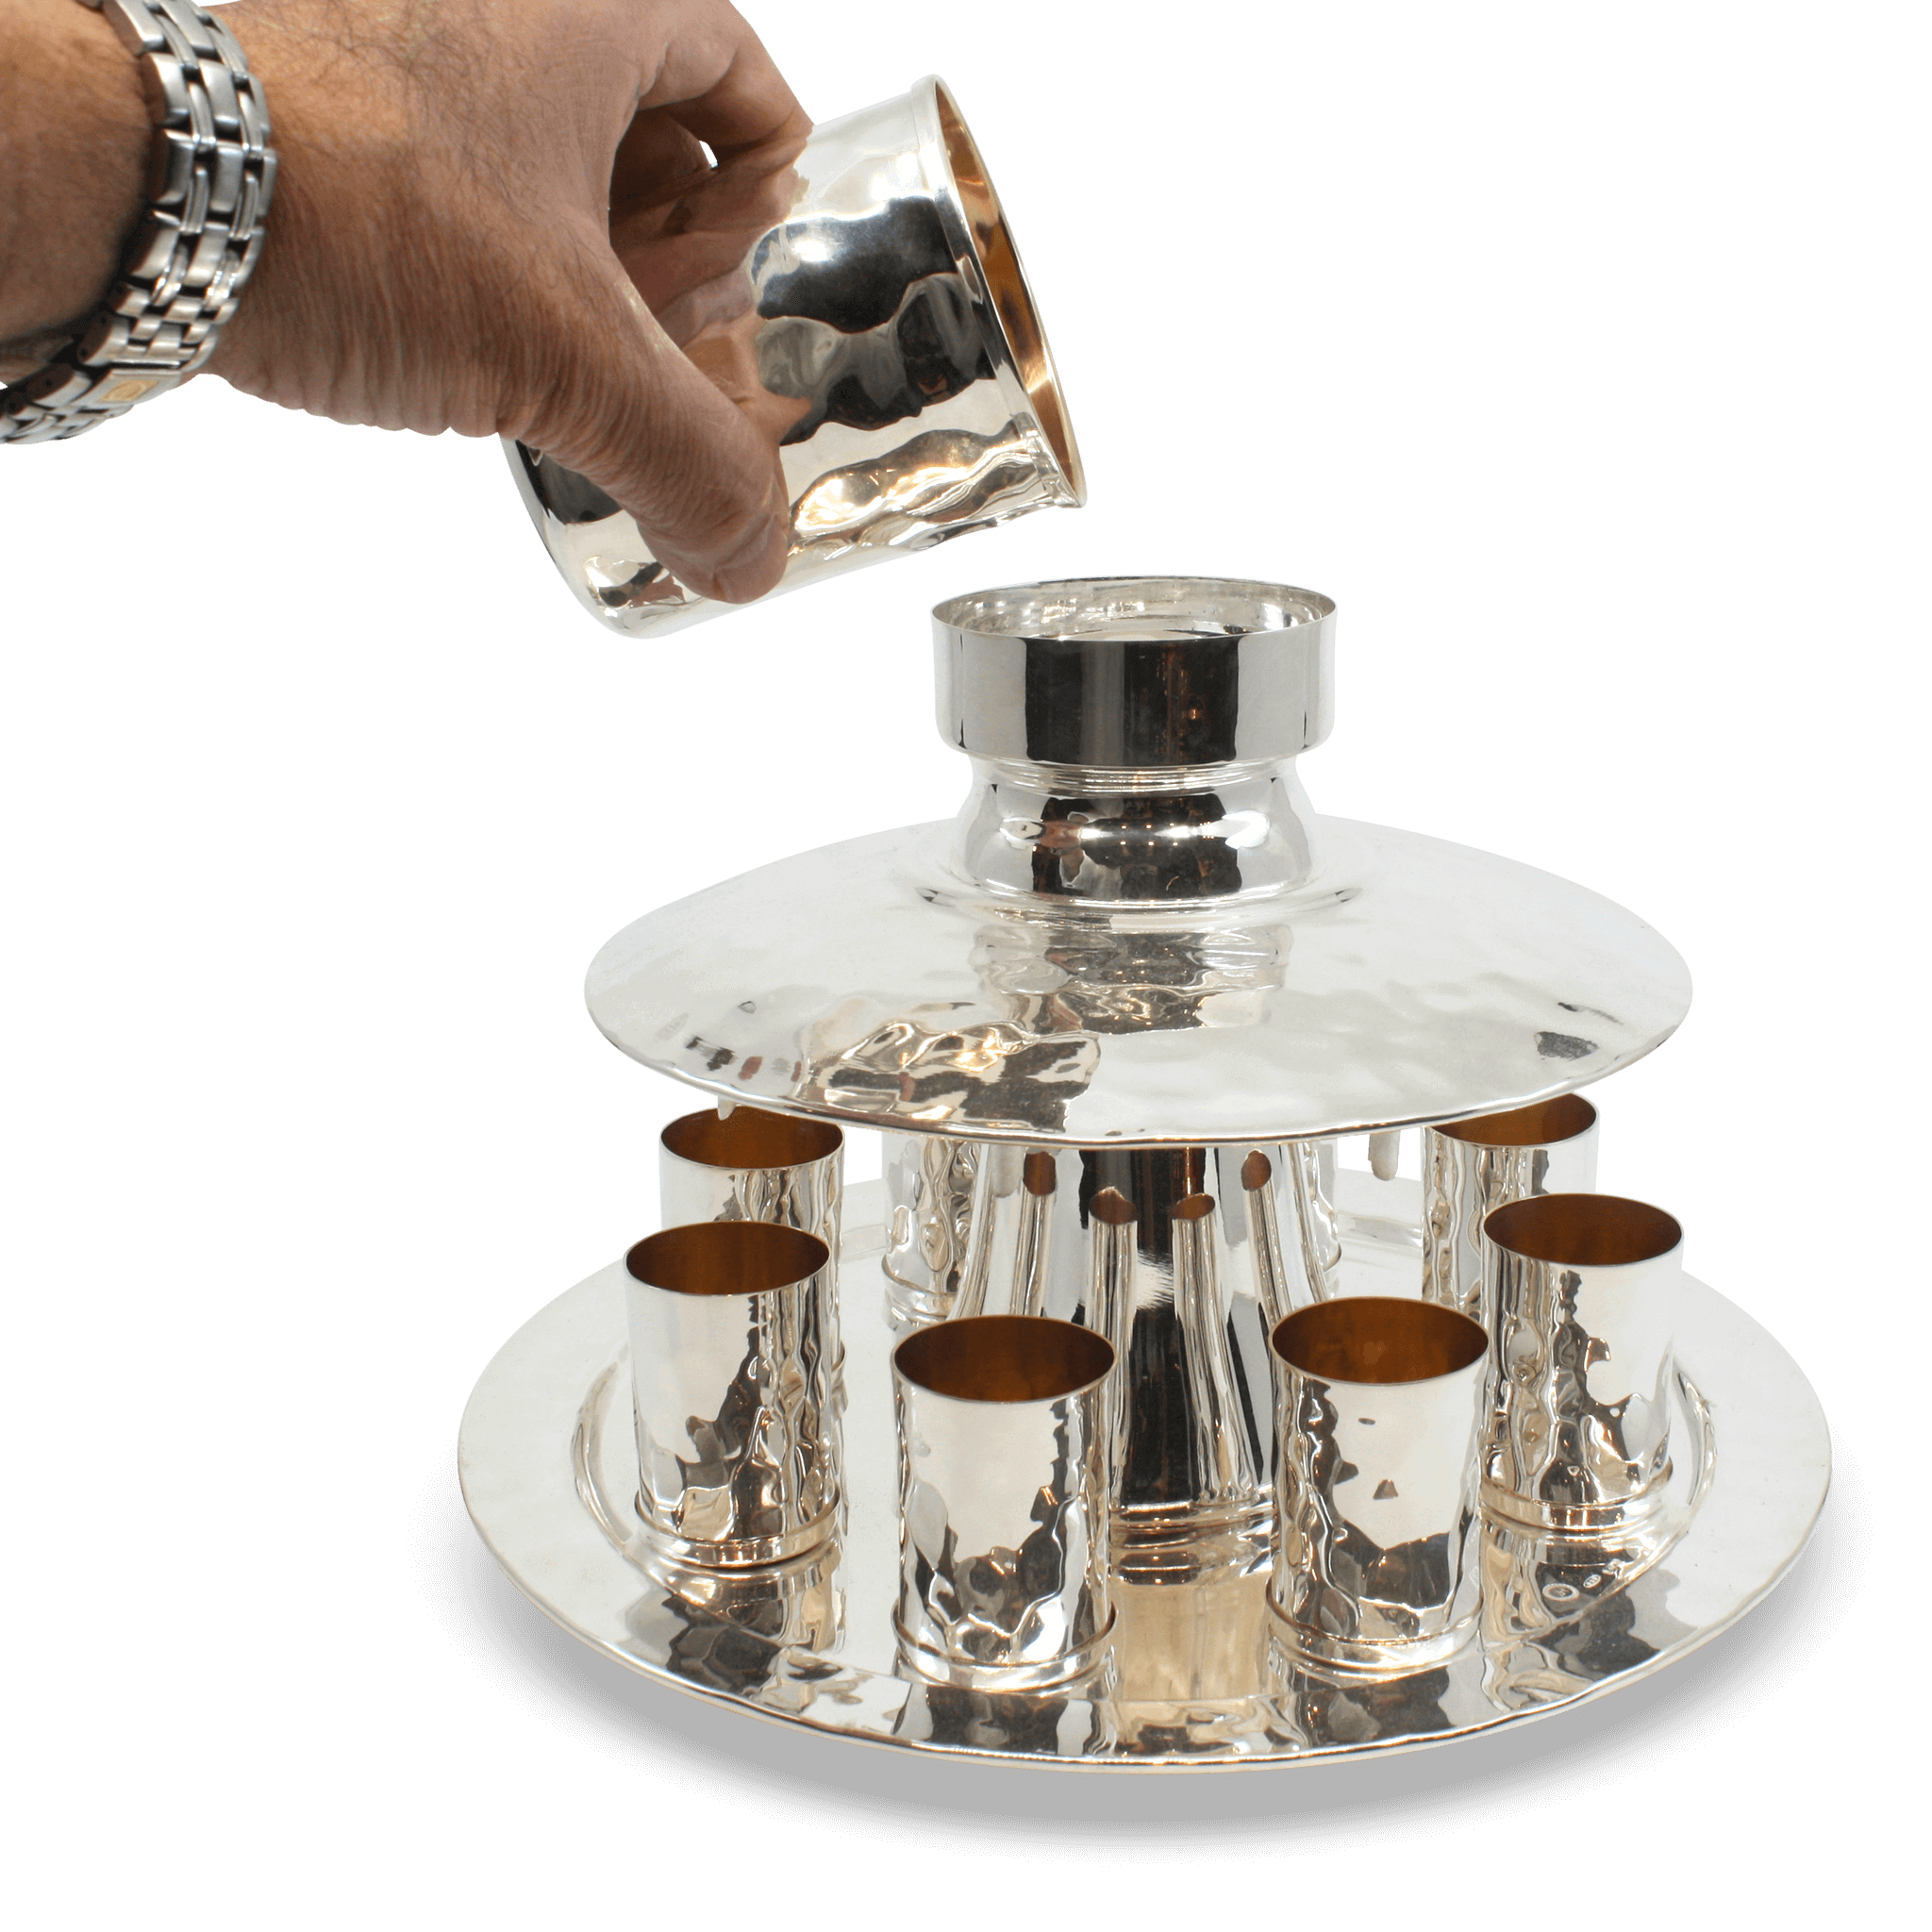 Softly hammered wine fountain for 8 A - Piece By Zion Hadad